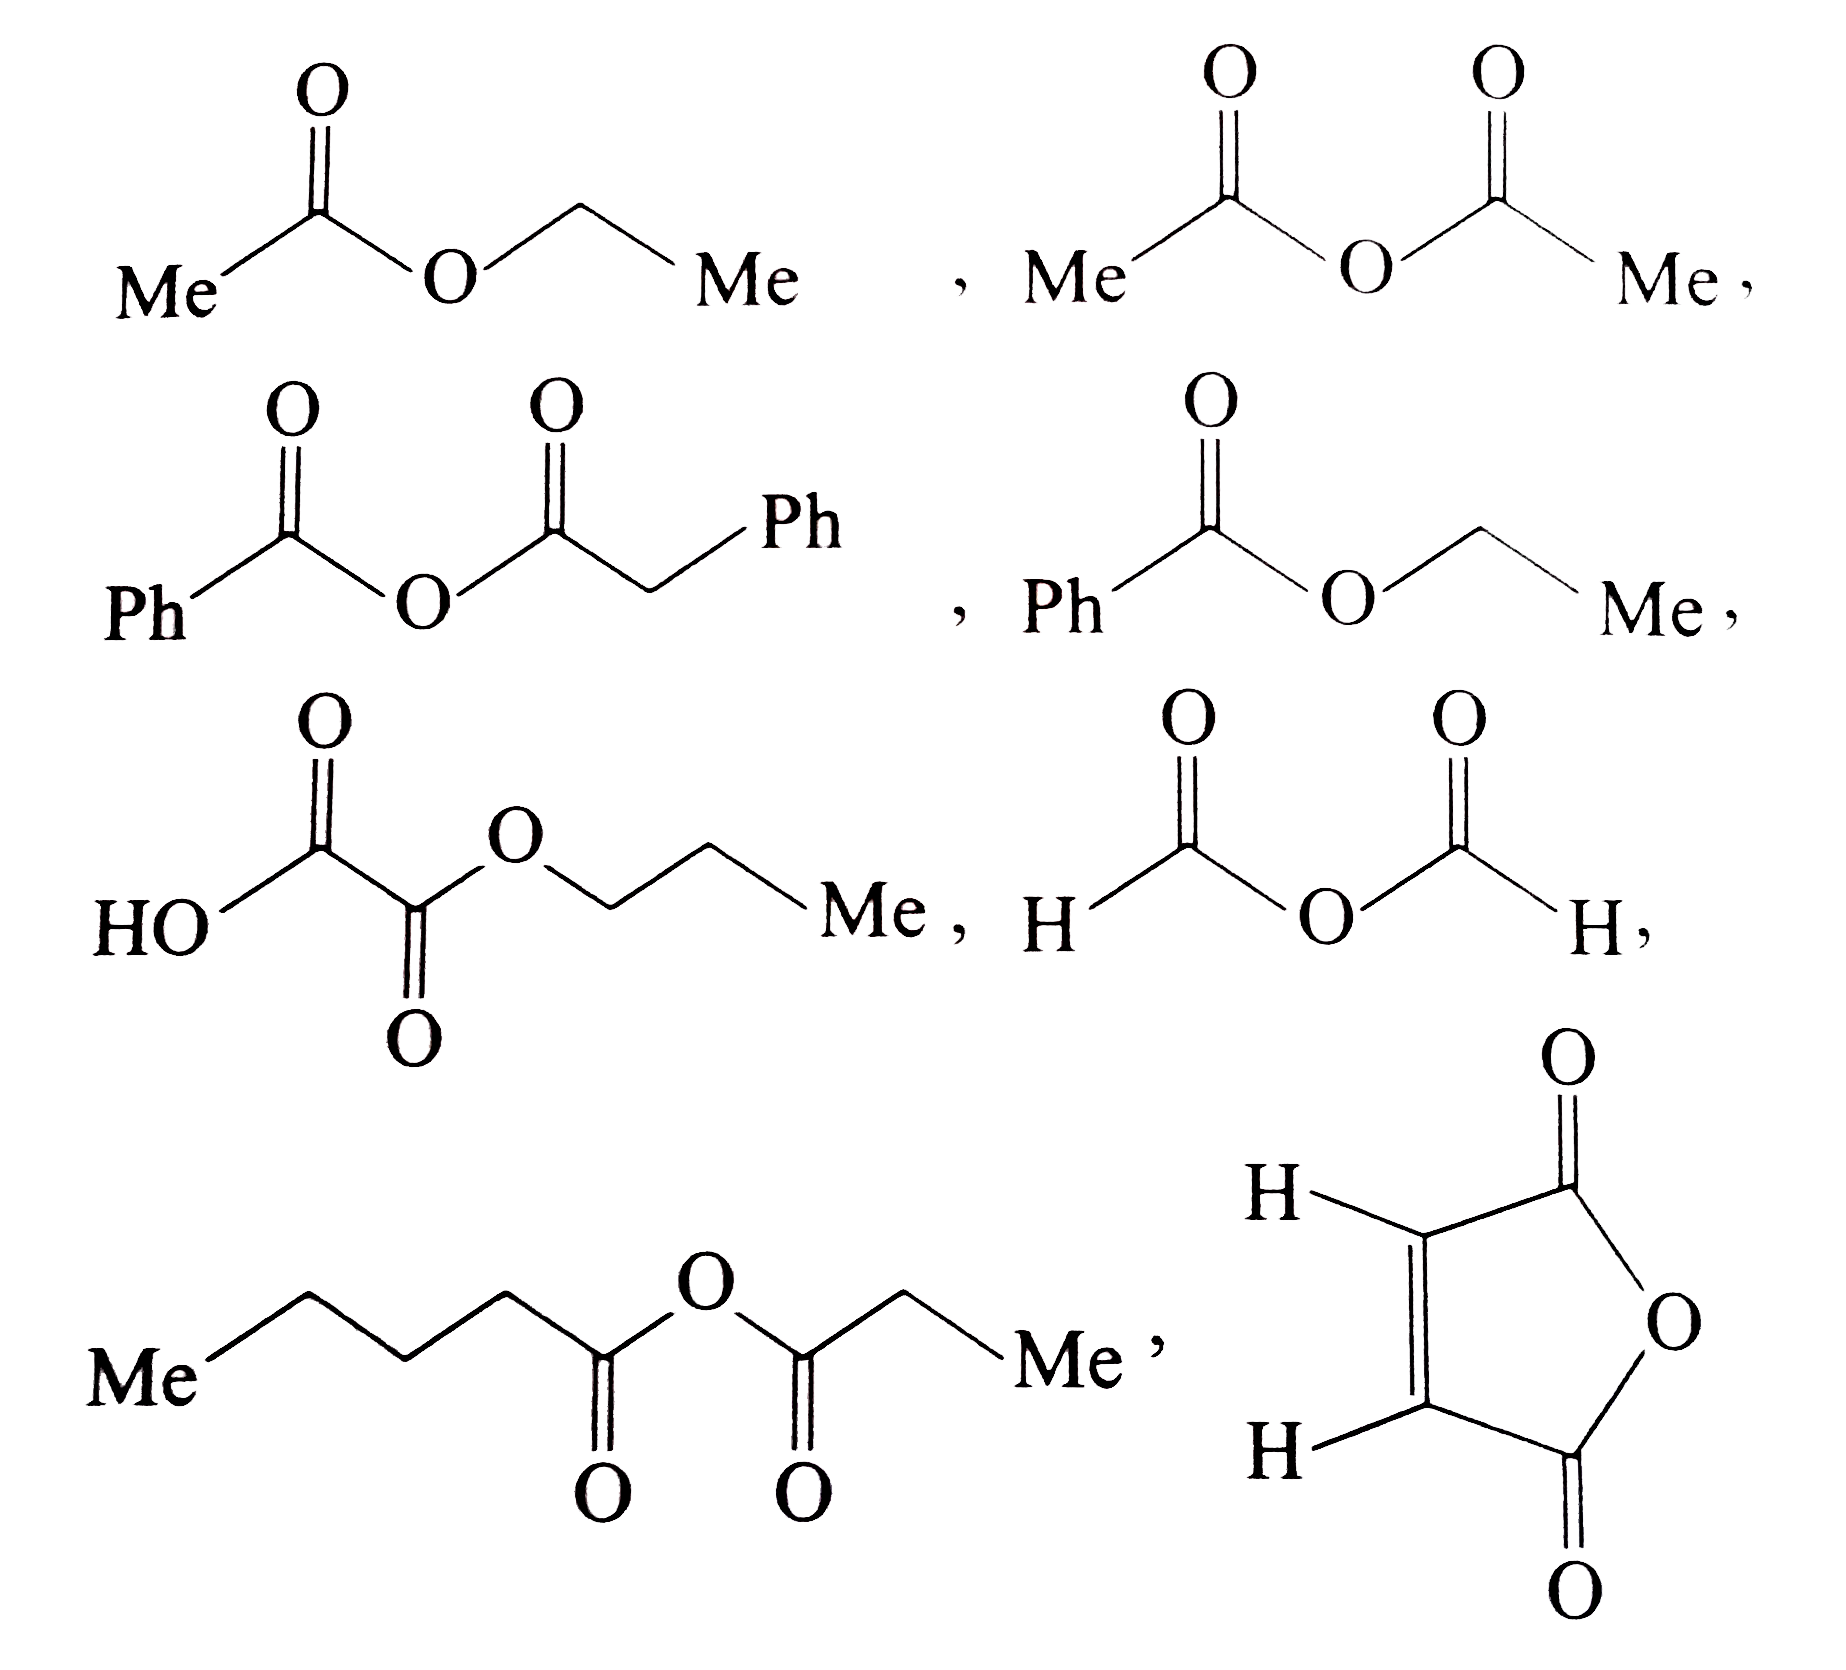 How many of the following compounds are anhydrides?